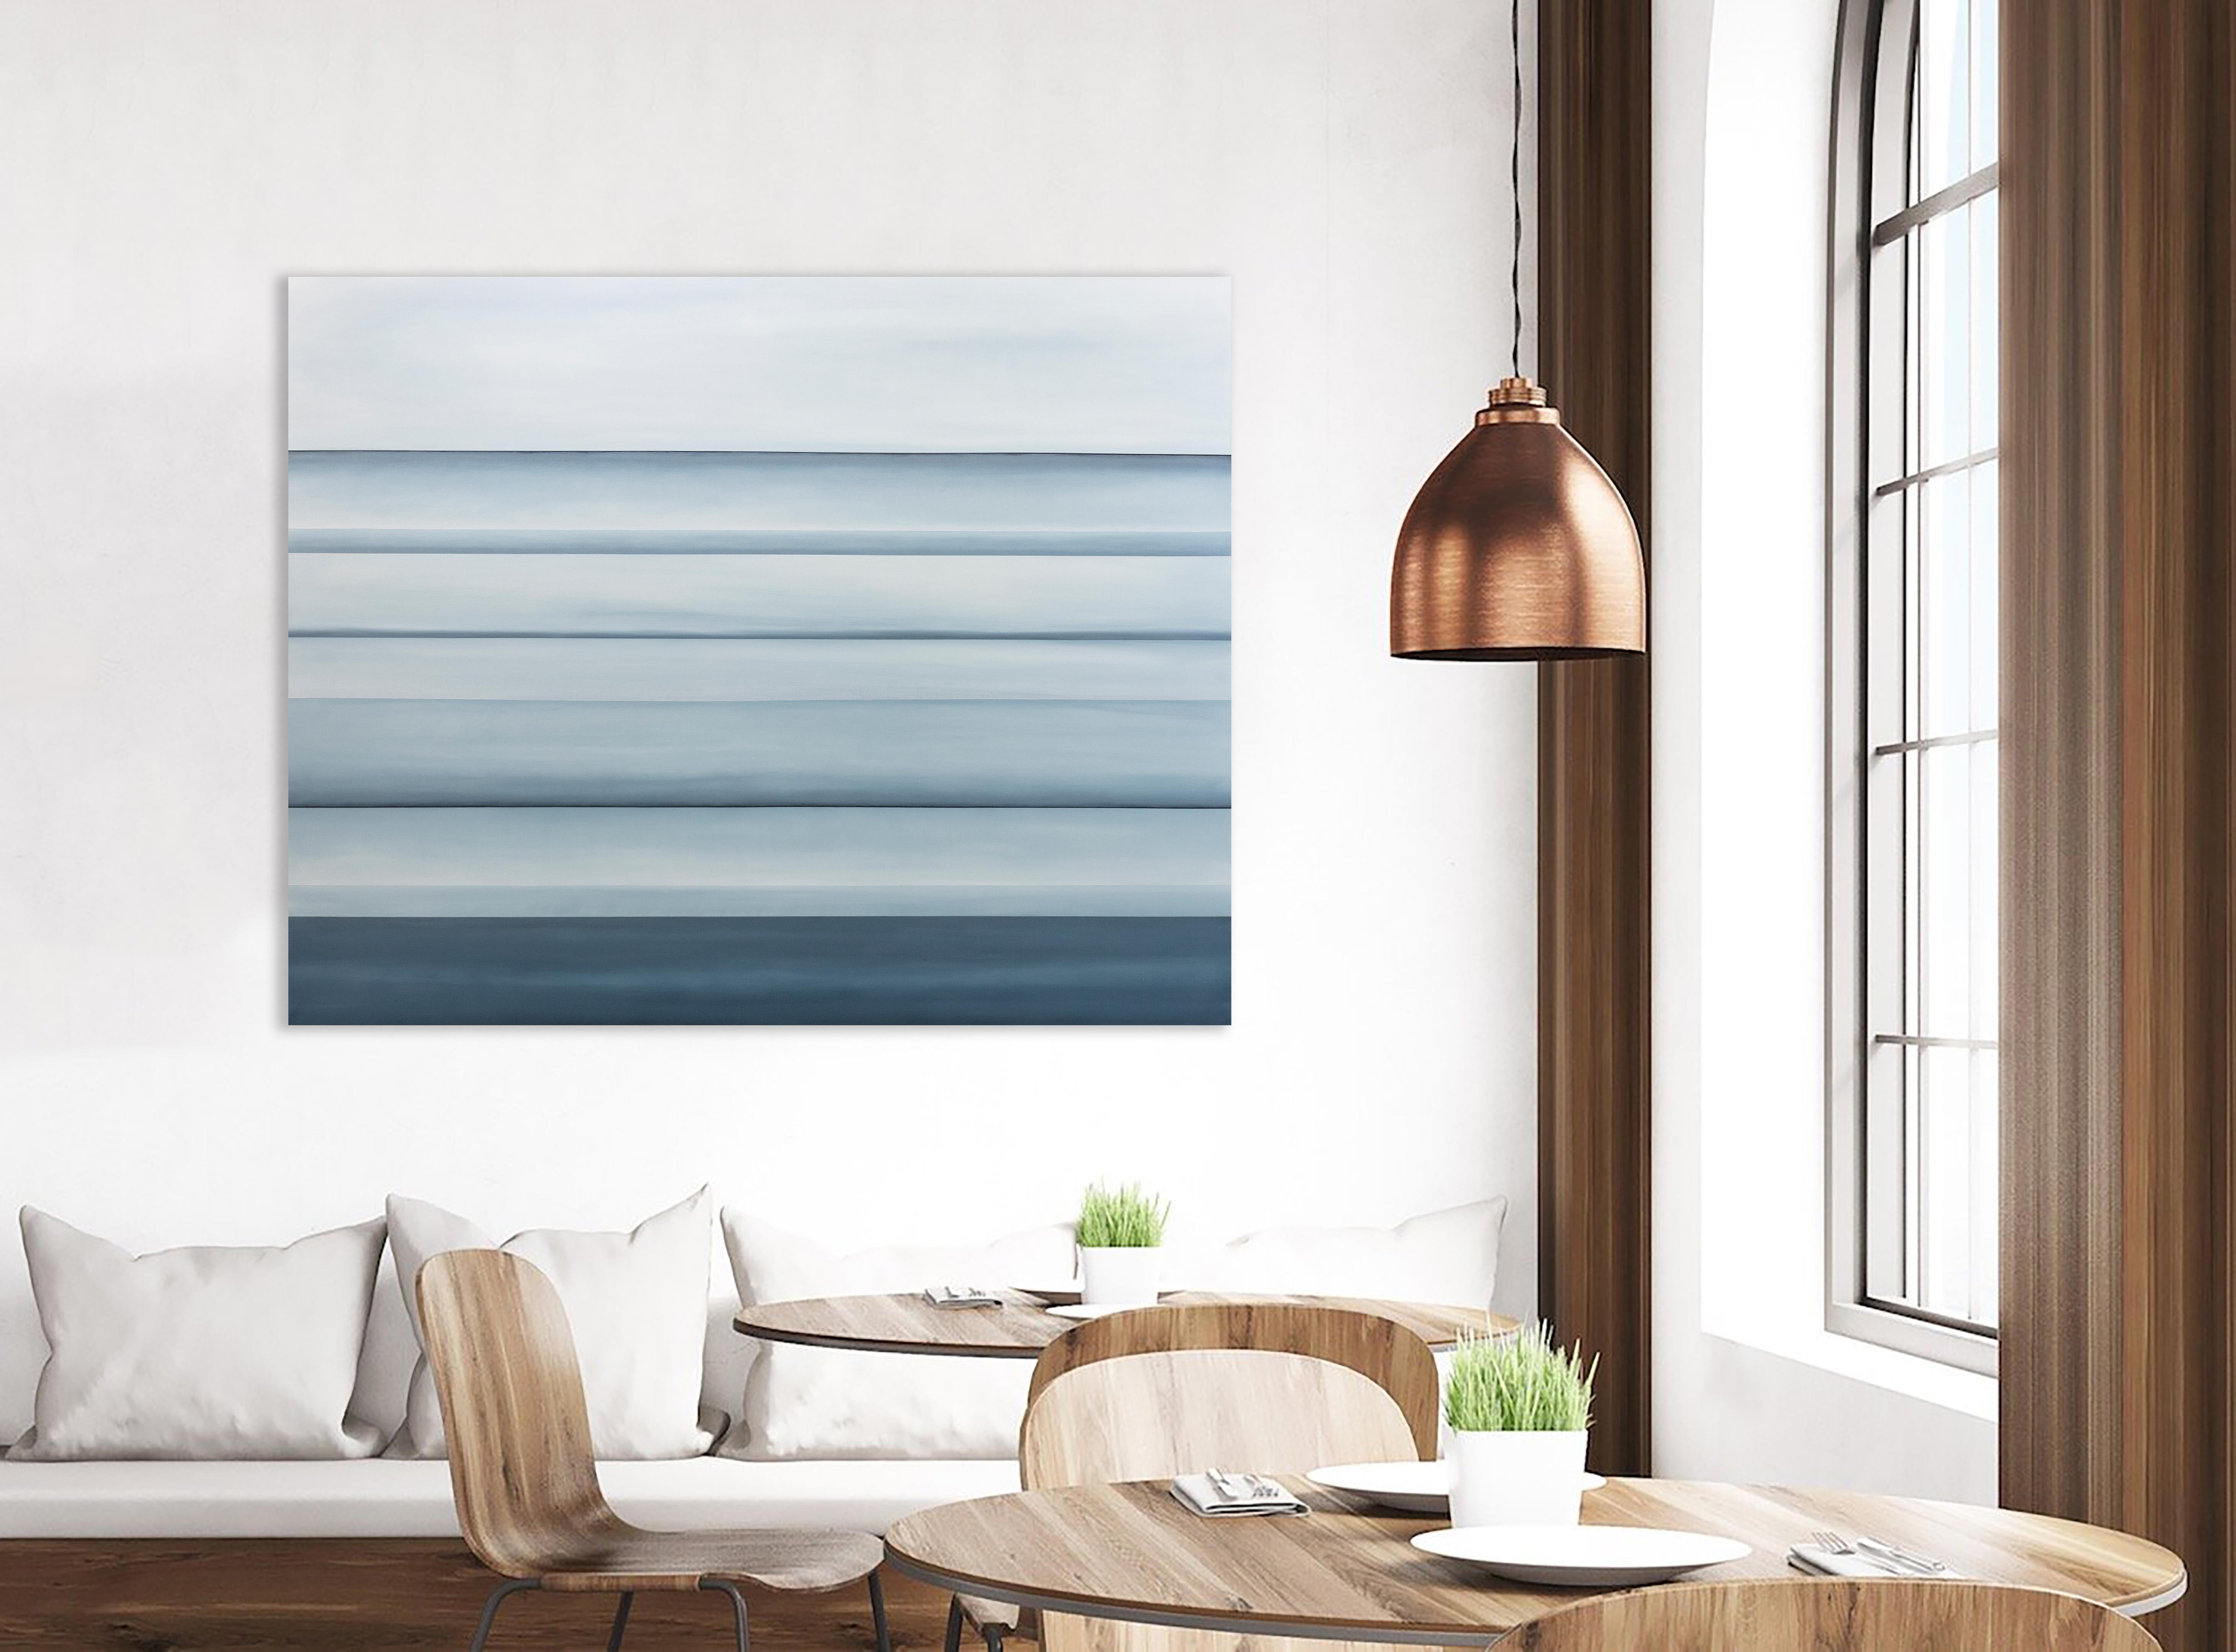 This abstract statement painting by Tony Iadicicco is made with oil paint on canvas and features a blue monochromatic palette. The painting has an abstracted landscape composition, with stark horizon lines running through the canvas and soft blue